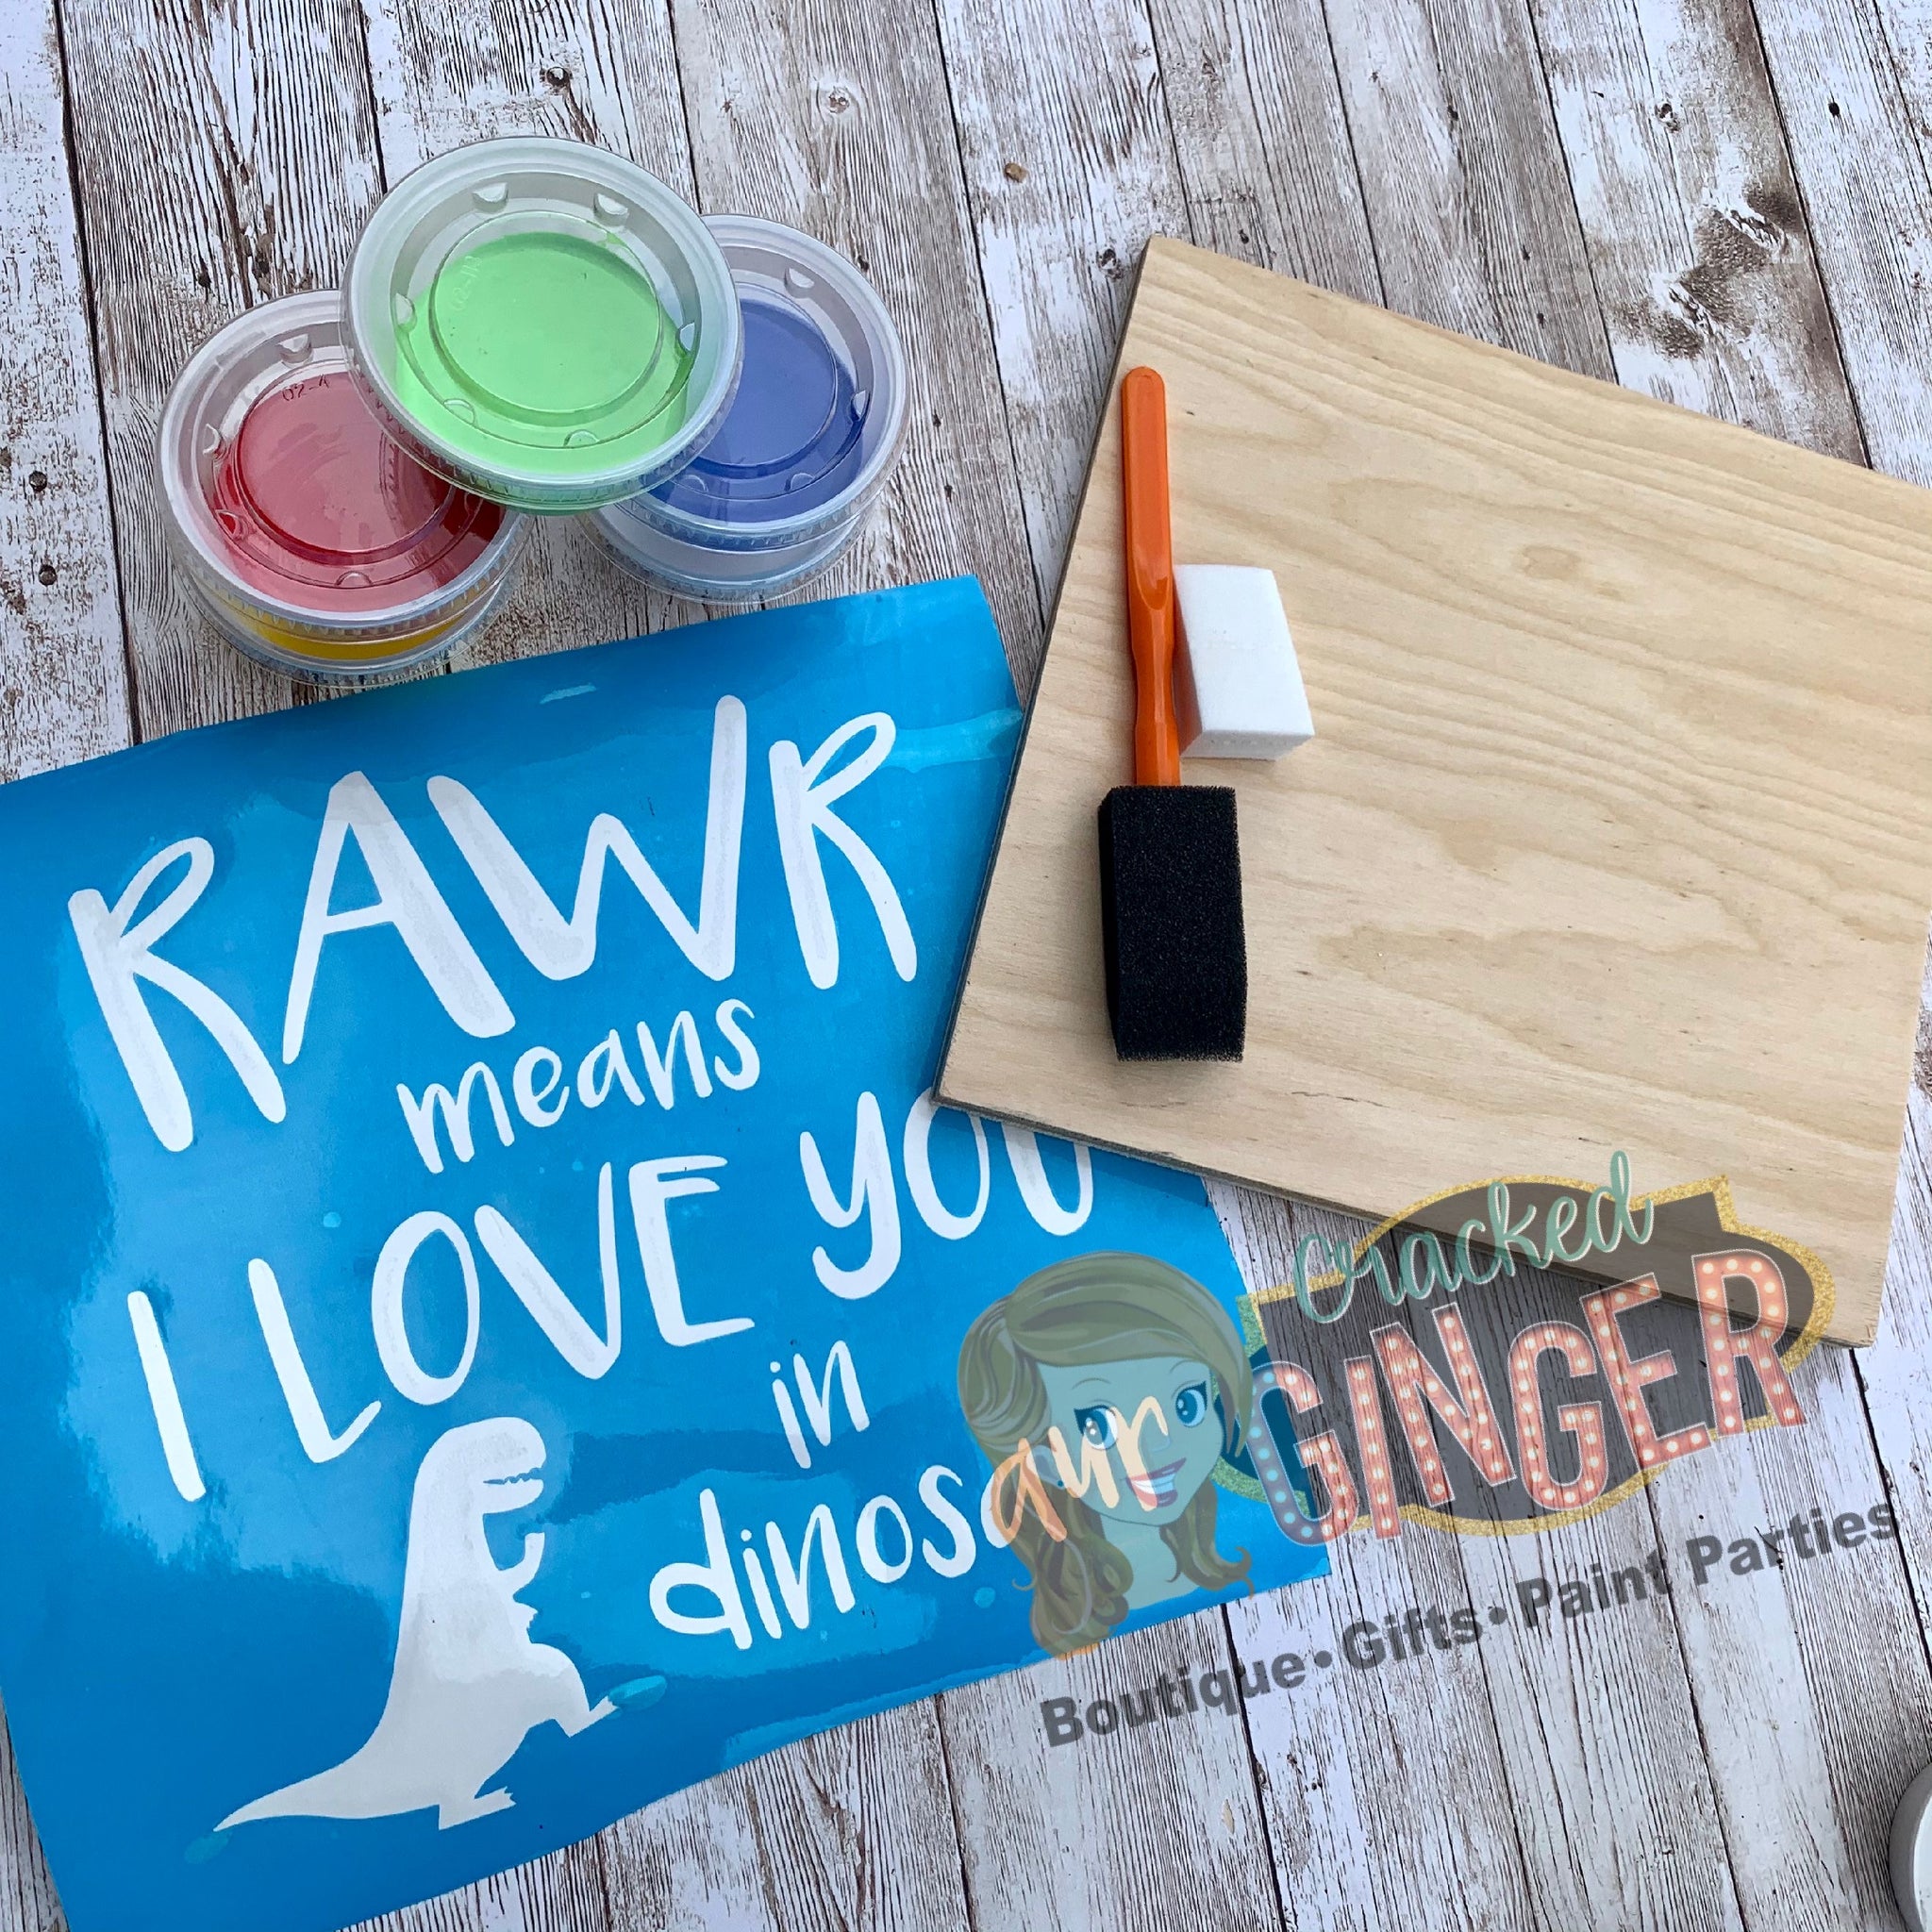 Rawr means I love you stencil sign board paint kit